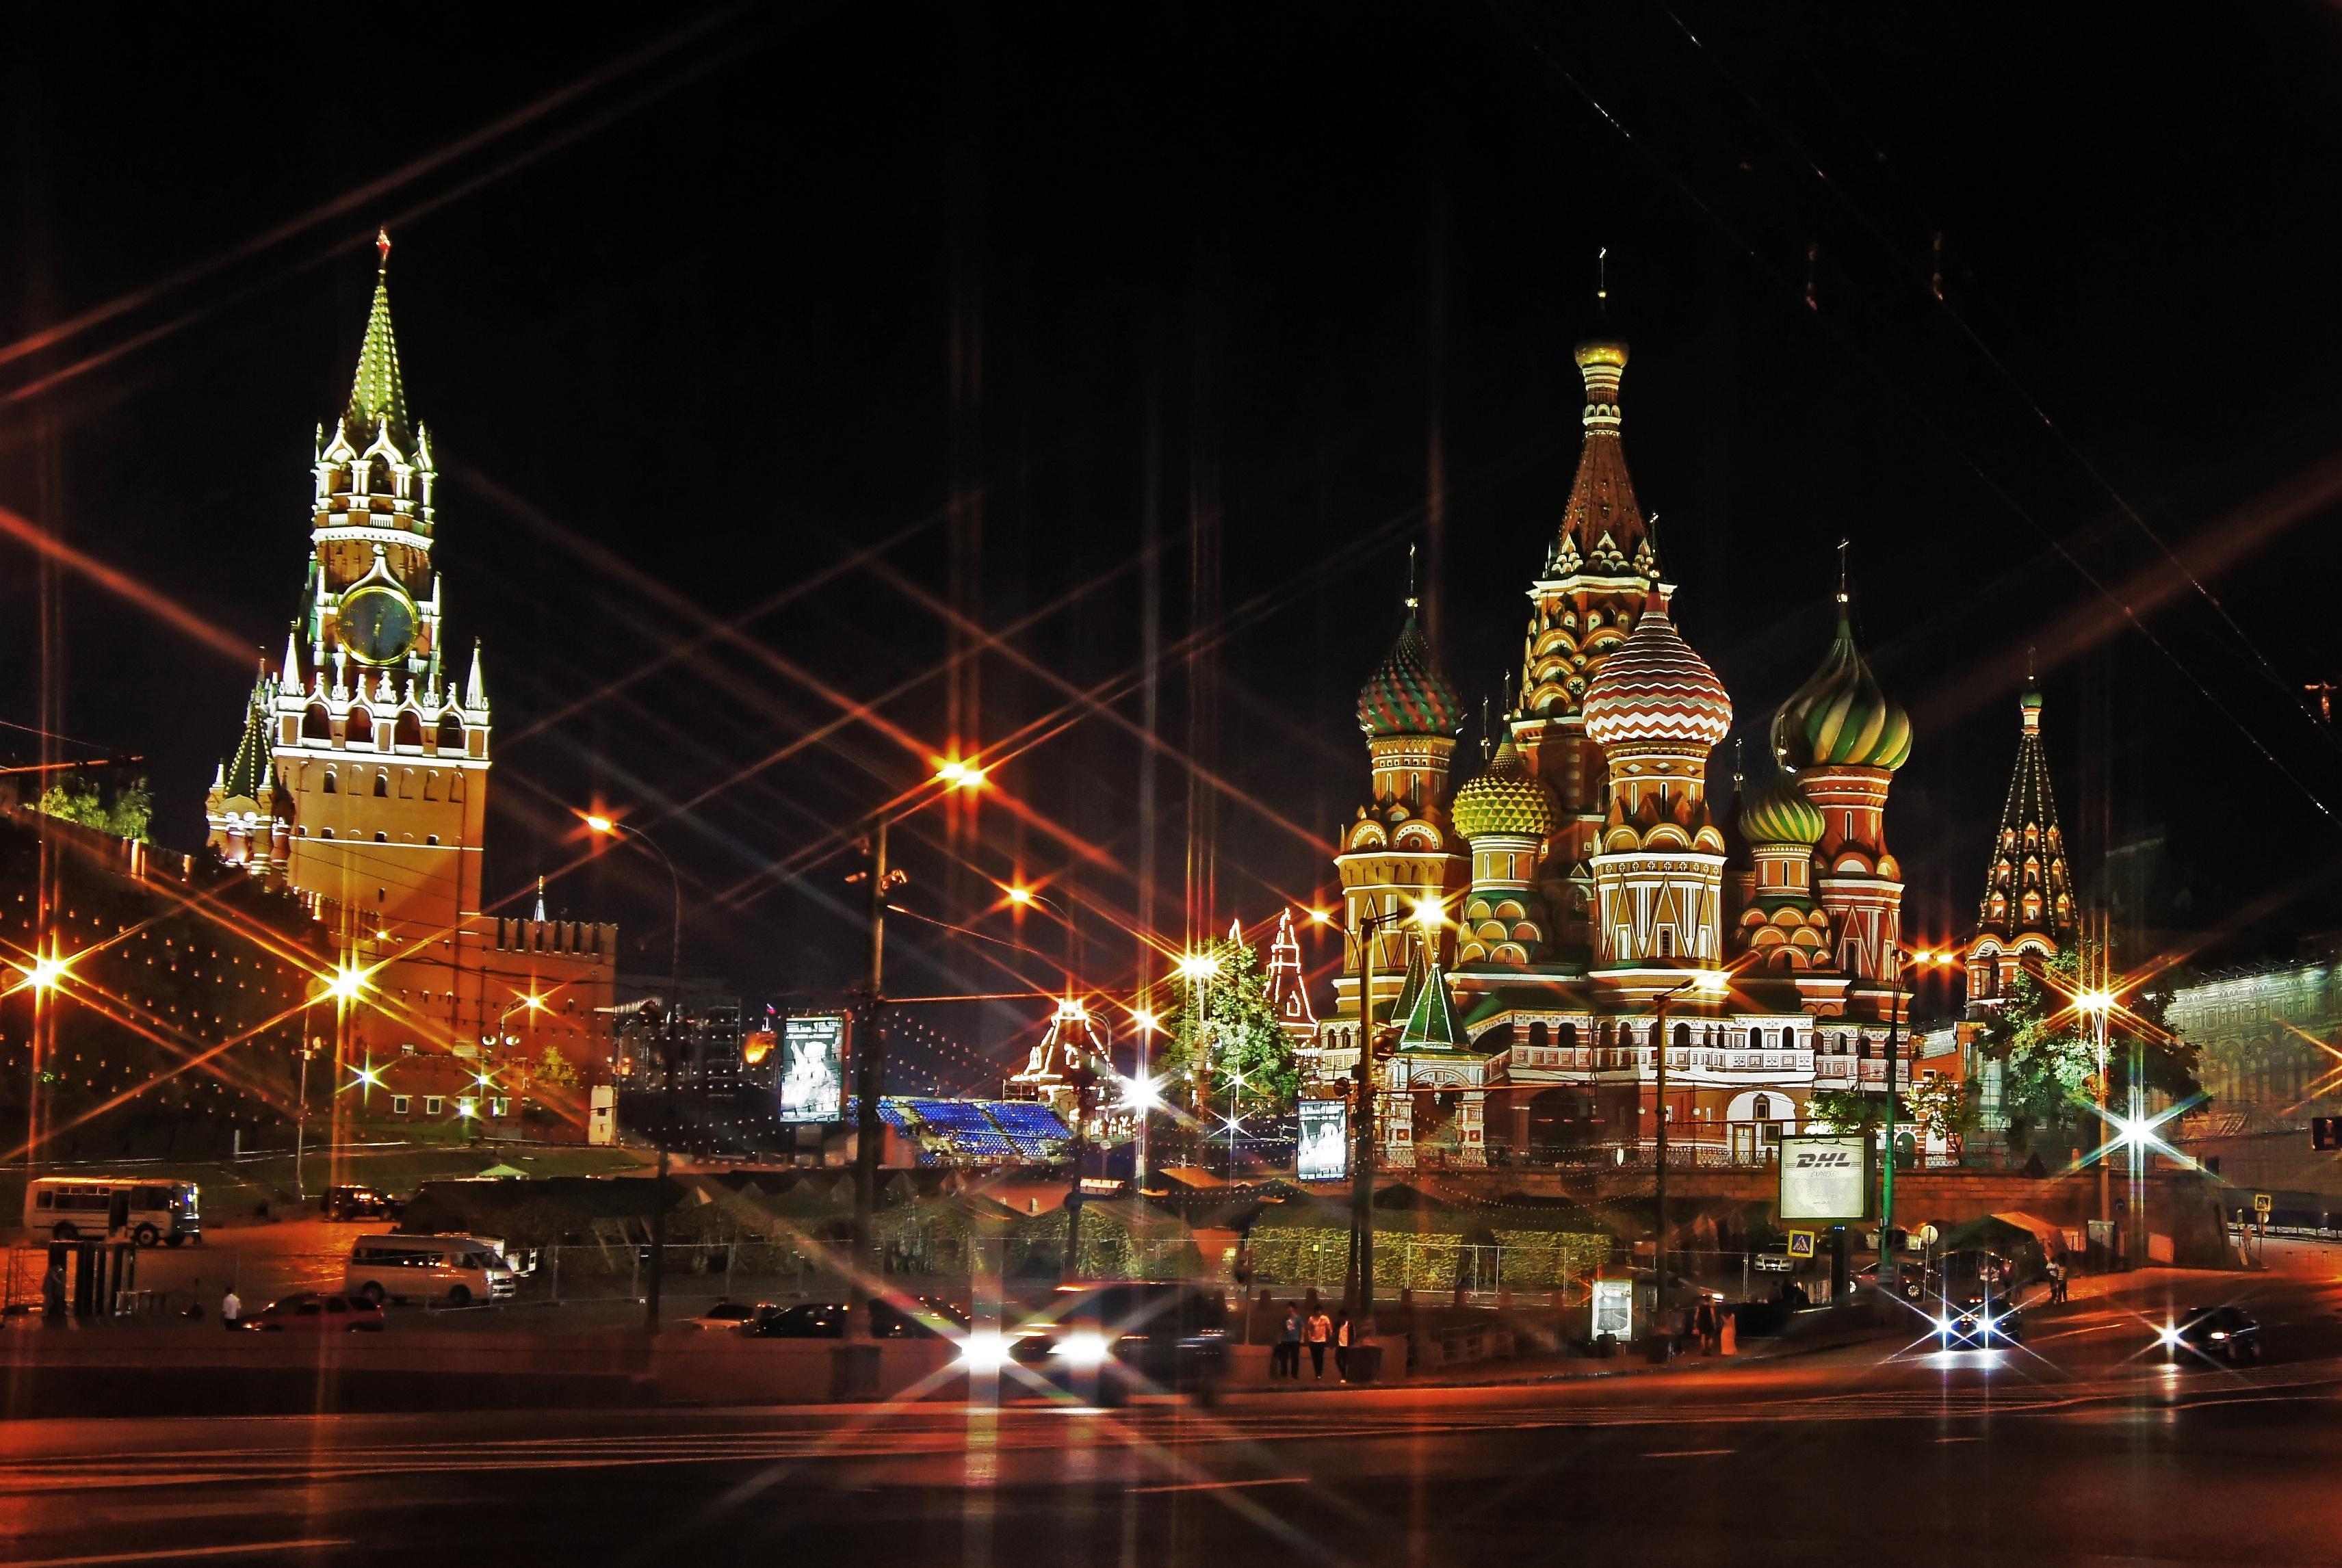 Download wallpaper 3423x2292 moscow, russia, red square